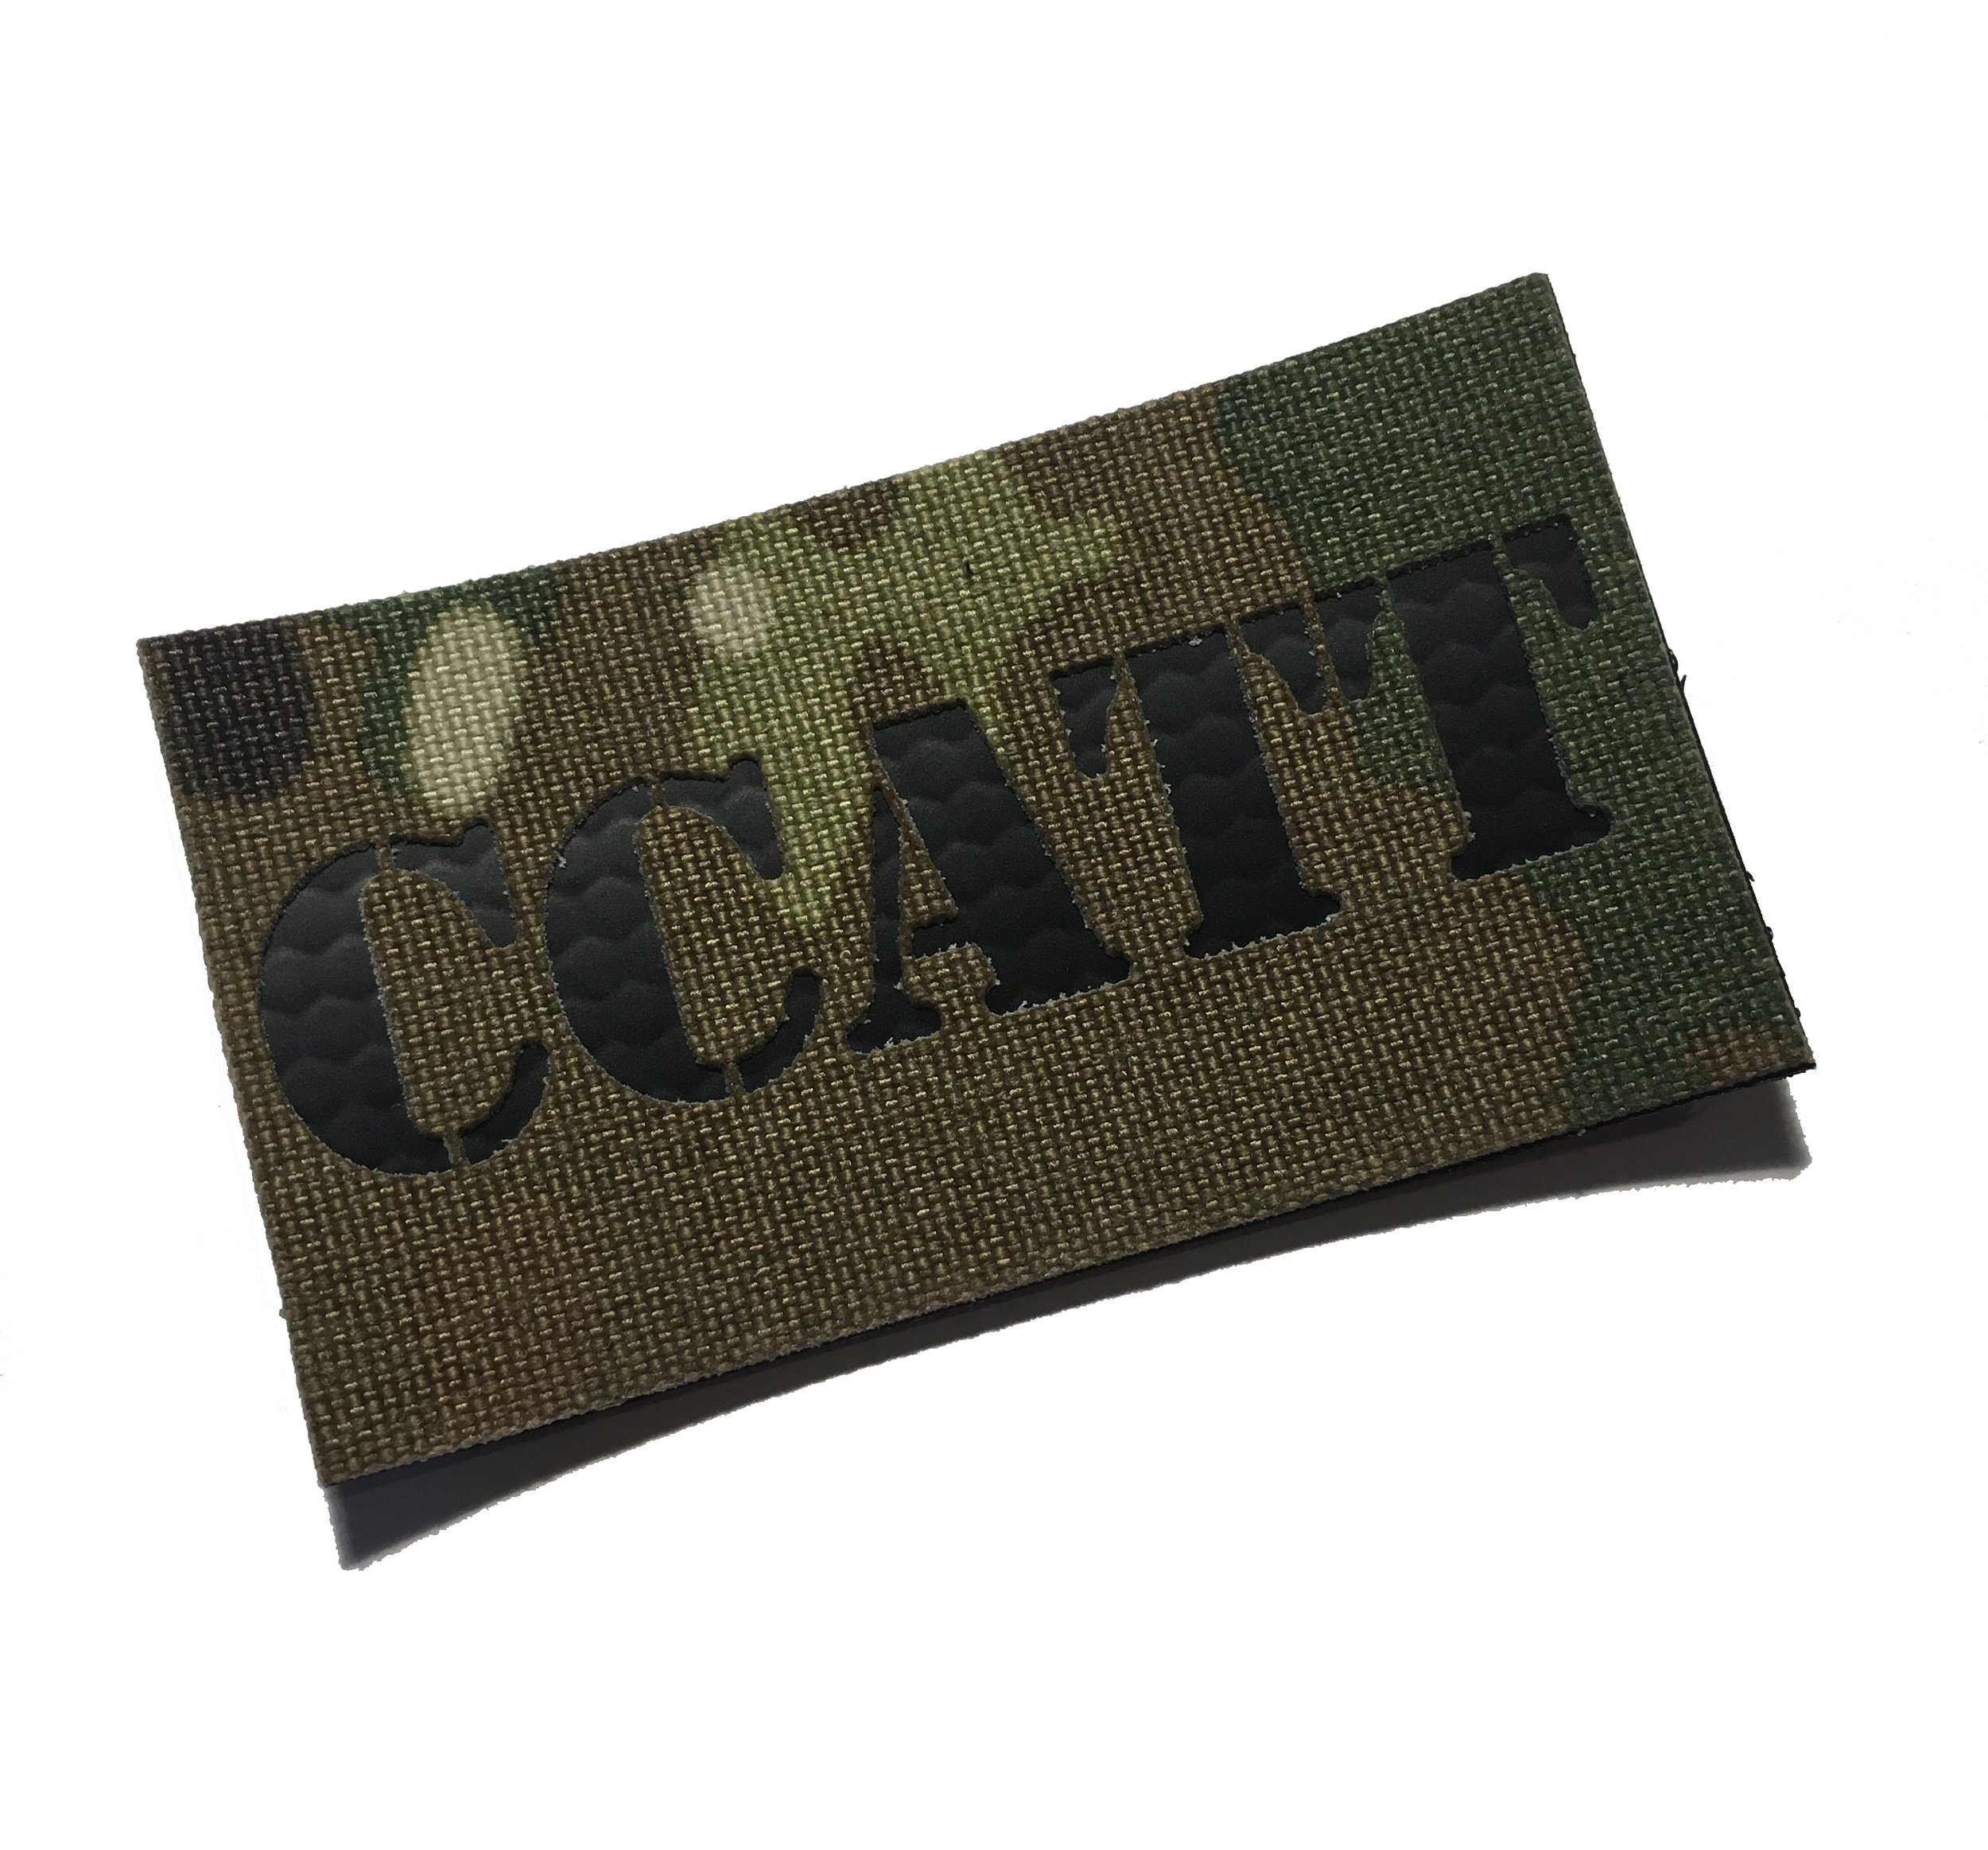 HOOK/LOOP 3 TACTICAL Covert 1"x1" INCH FLIR THERMAL REFLECTIVE Patch SQUARES 